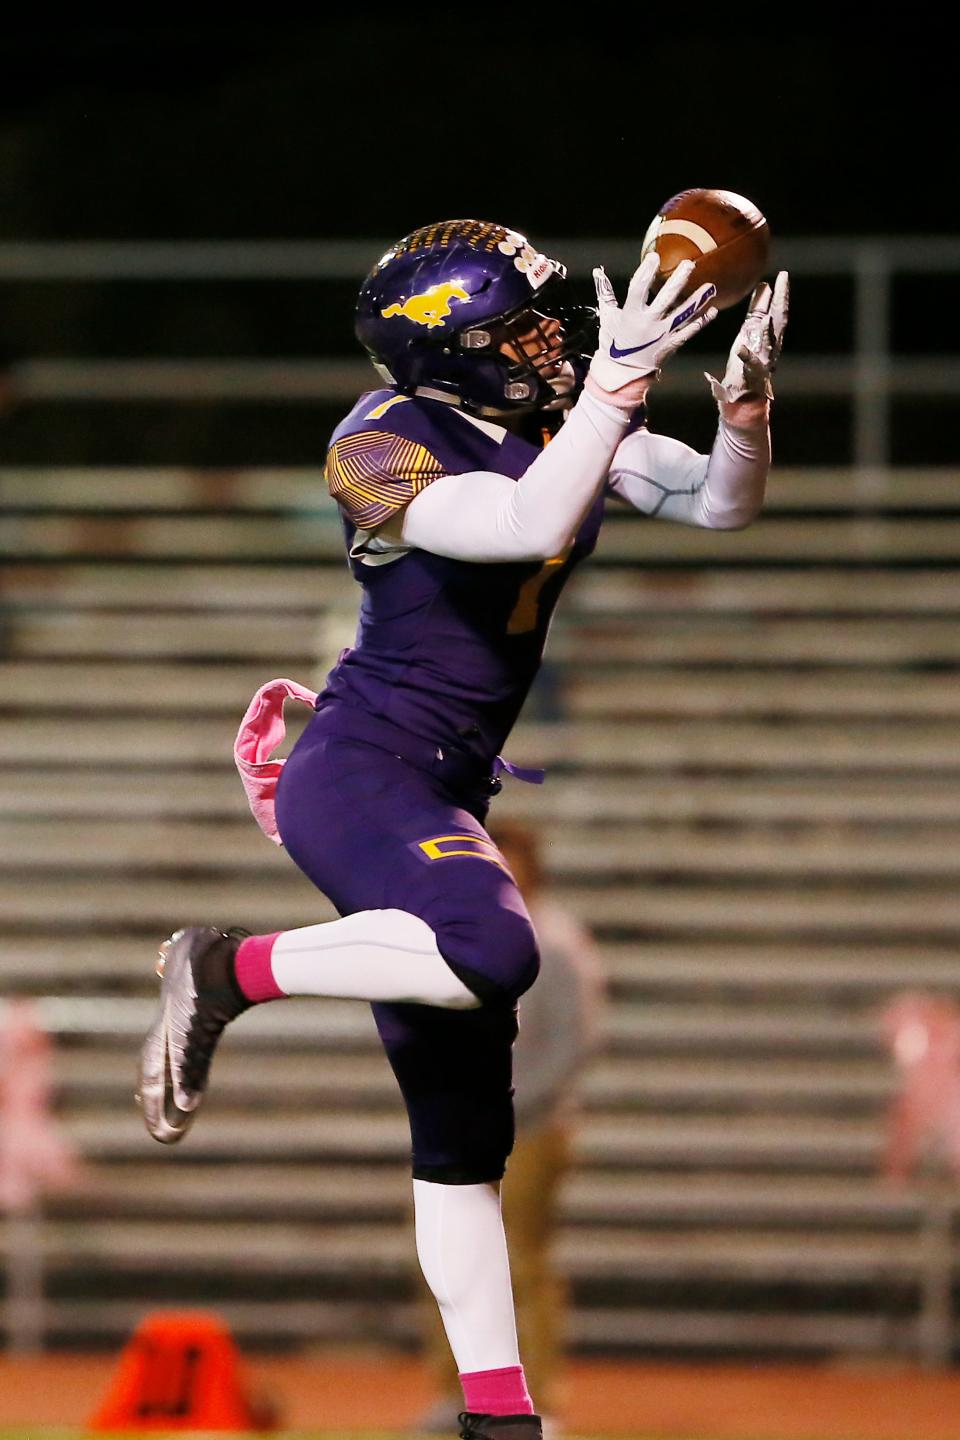 Burges' Alec Marenco completes a pass to score a touchdown against Bowie Friday, Oct. 25, at Burger High School in El Paso.